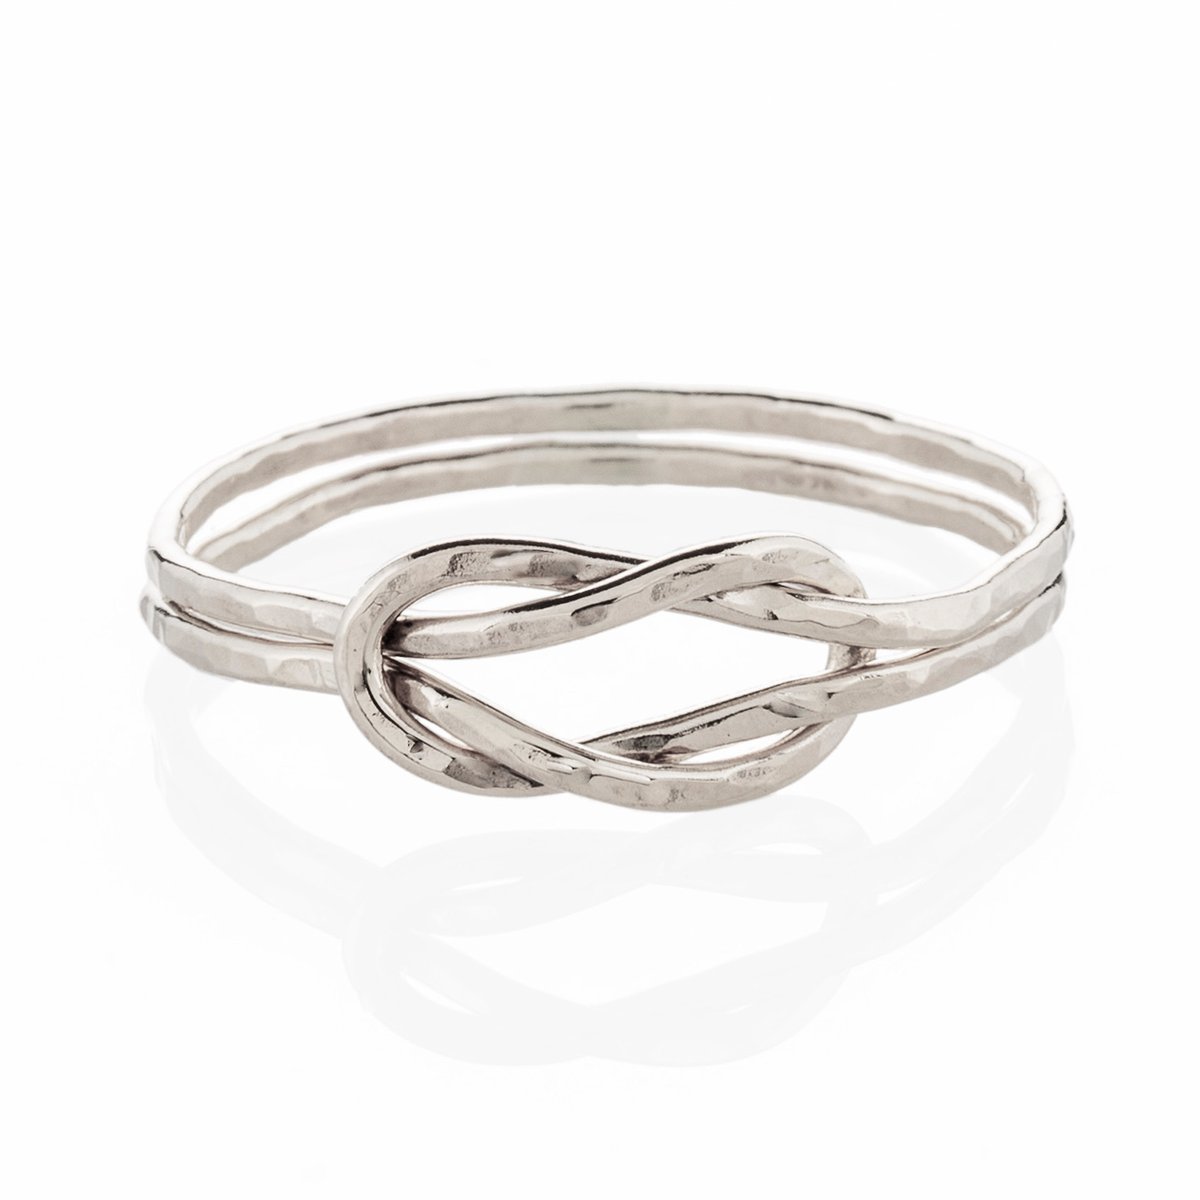 Image of Silver Connection Ring 